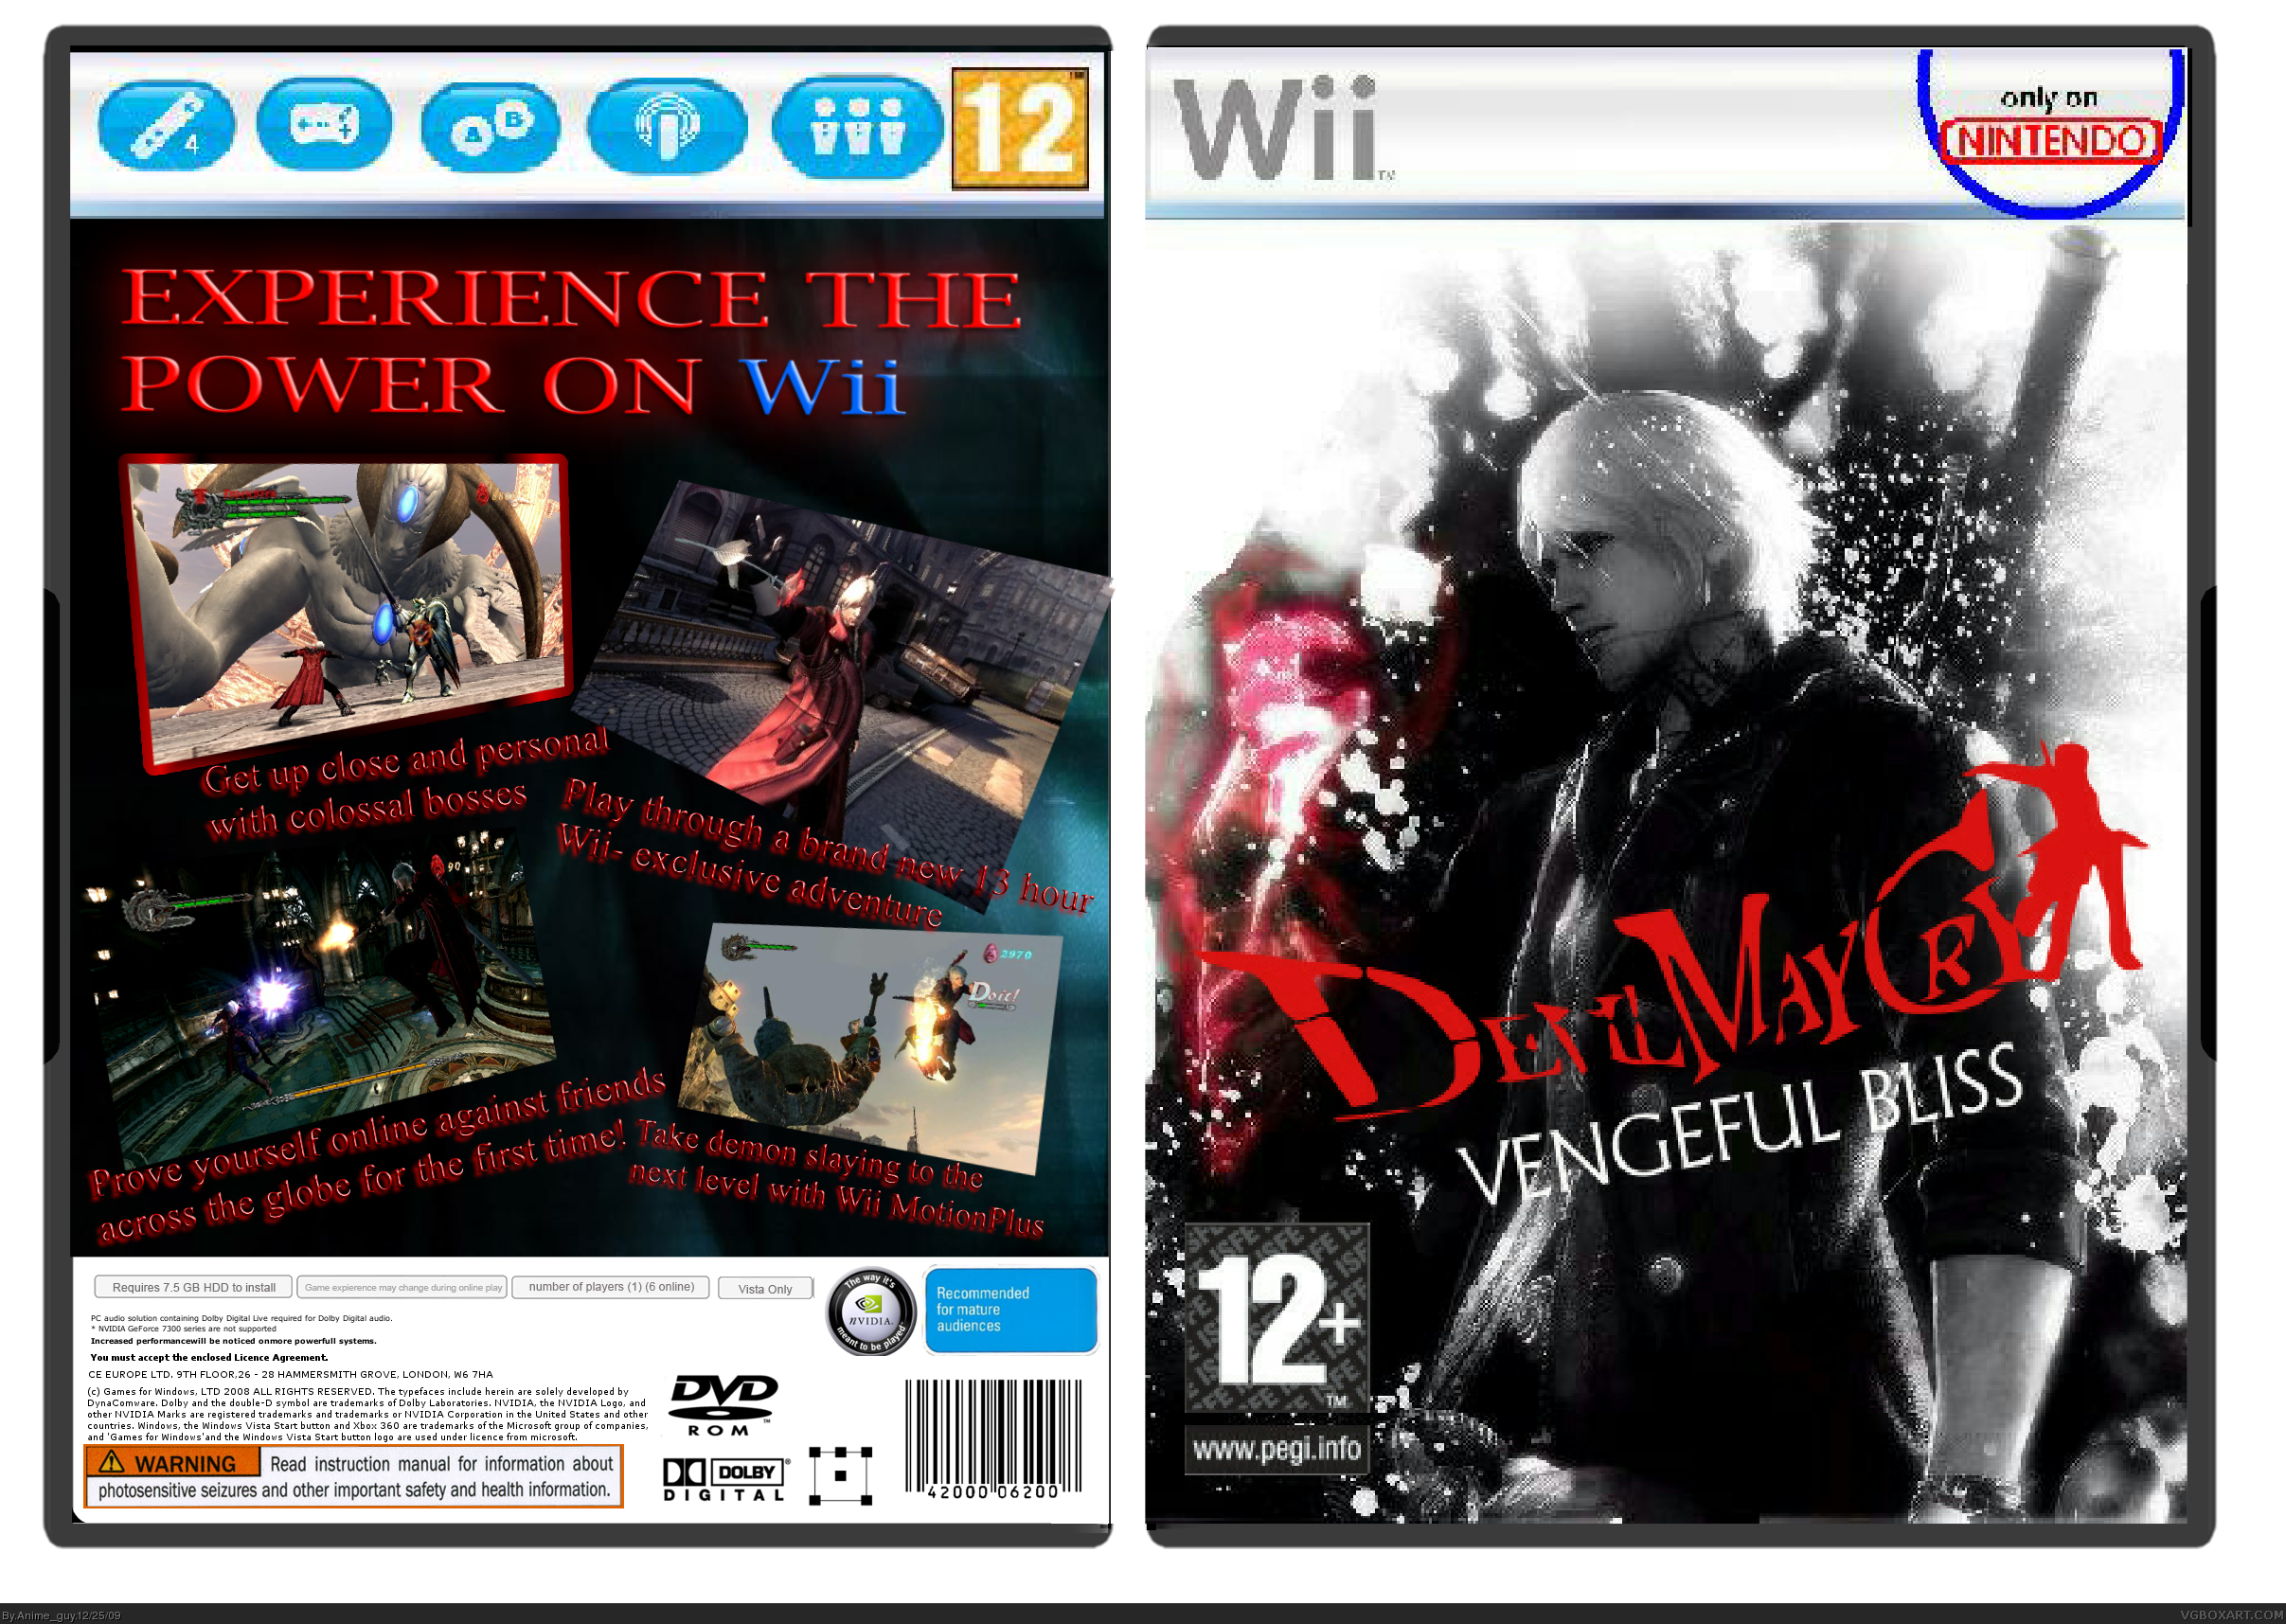 Devil May Cry: Vengeful Bliss box cover